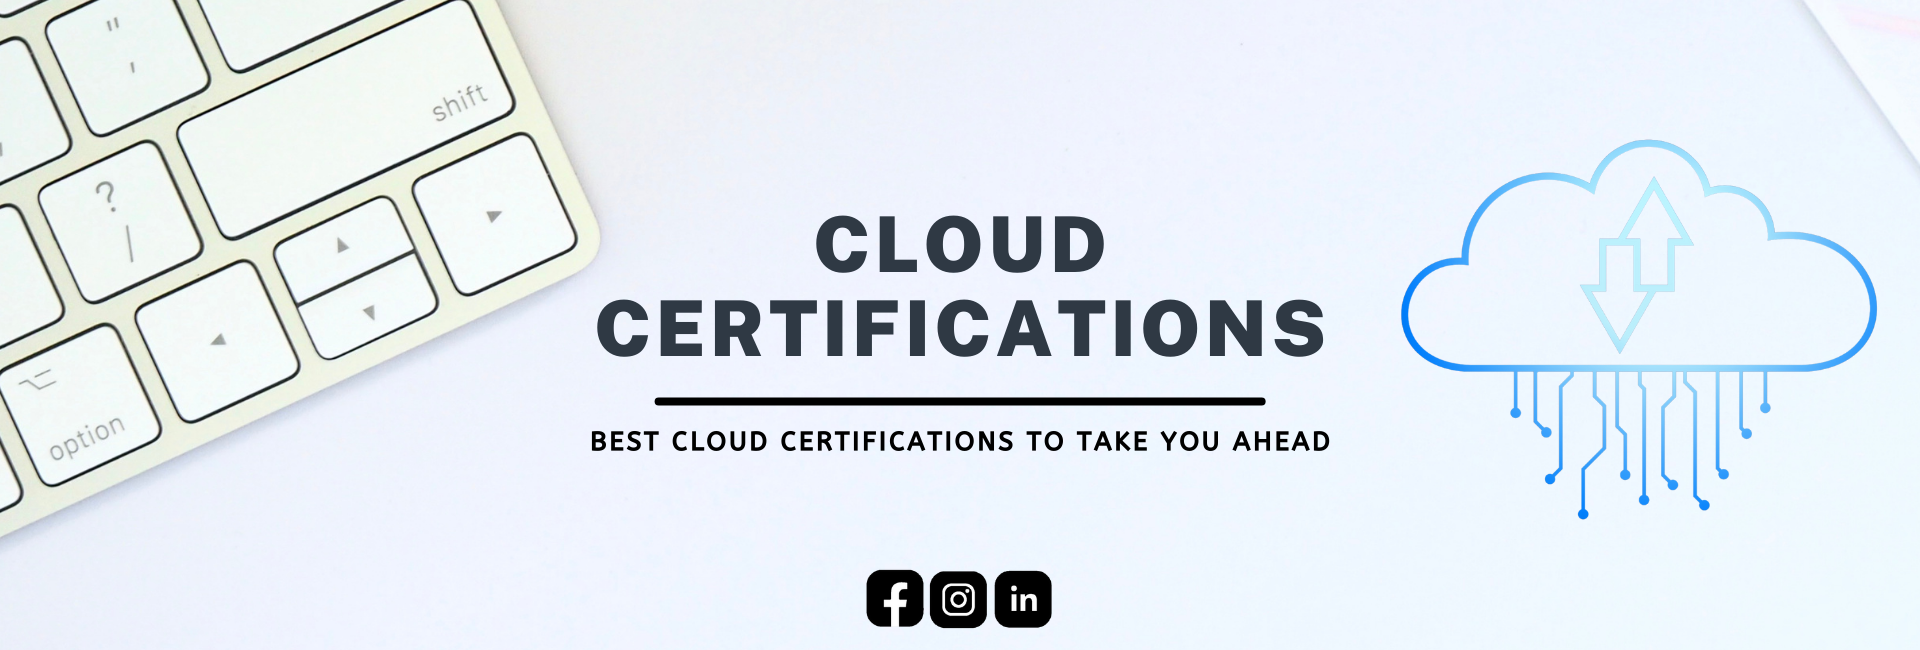 Best Cloud Certifications to Take you Ahead